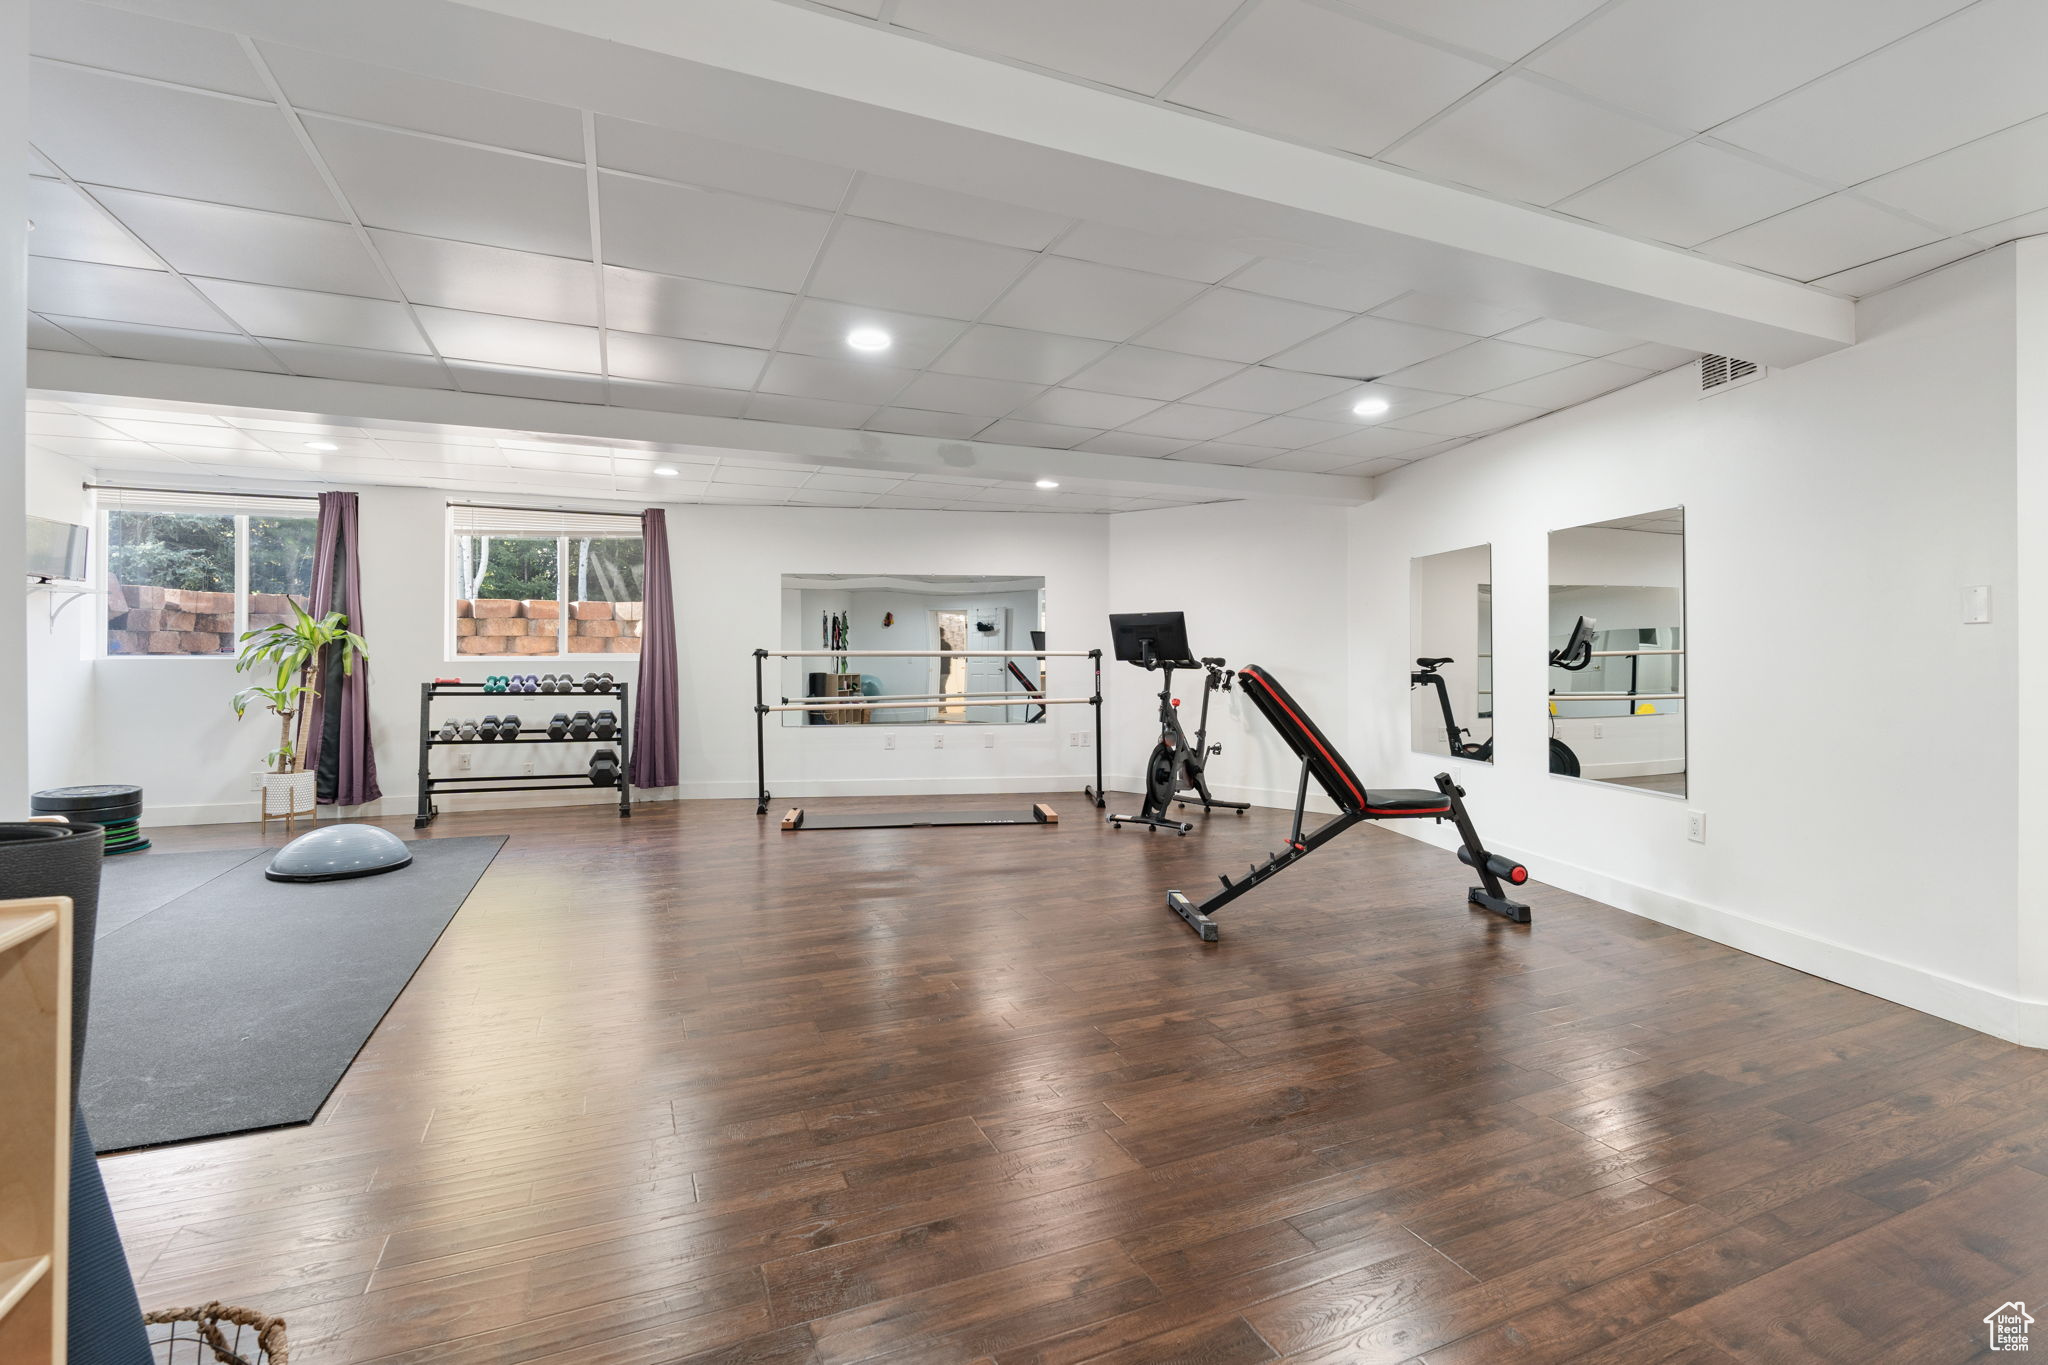 Workout room with a drop ceiling and hardwood / wood-style flooring